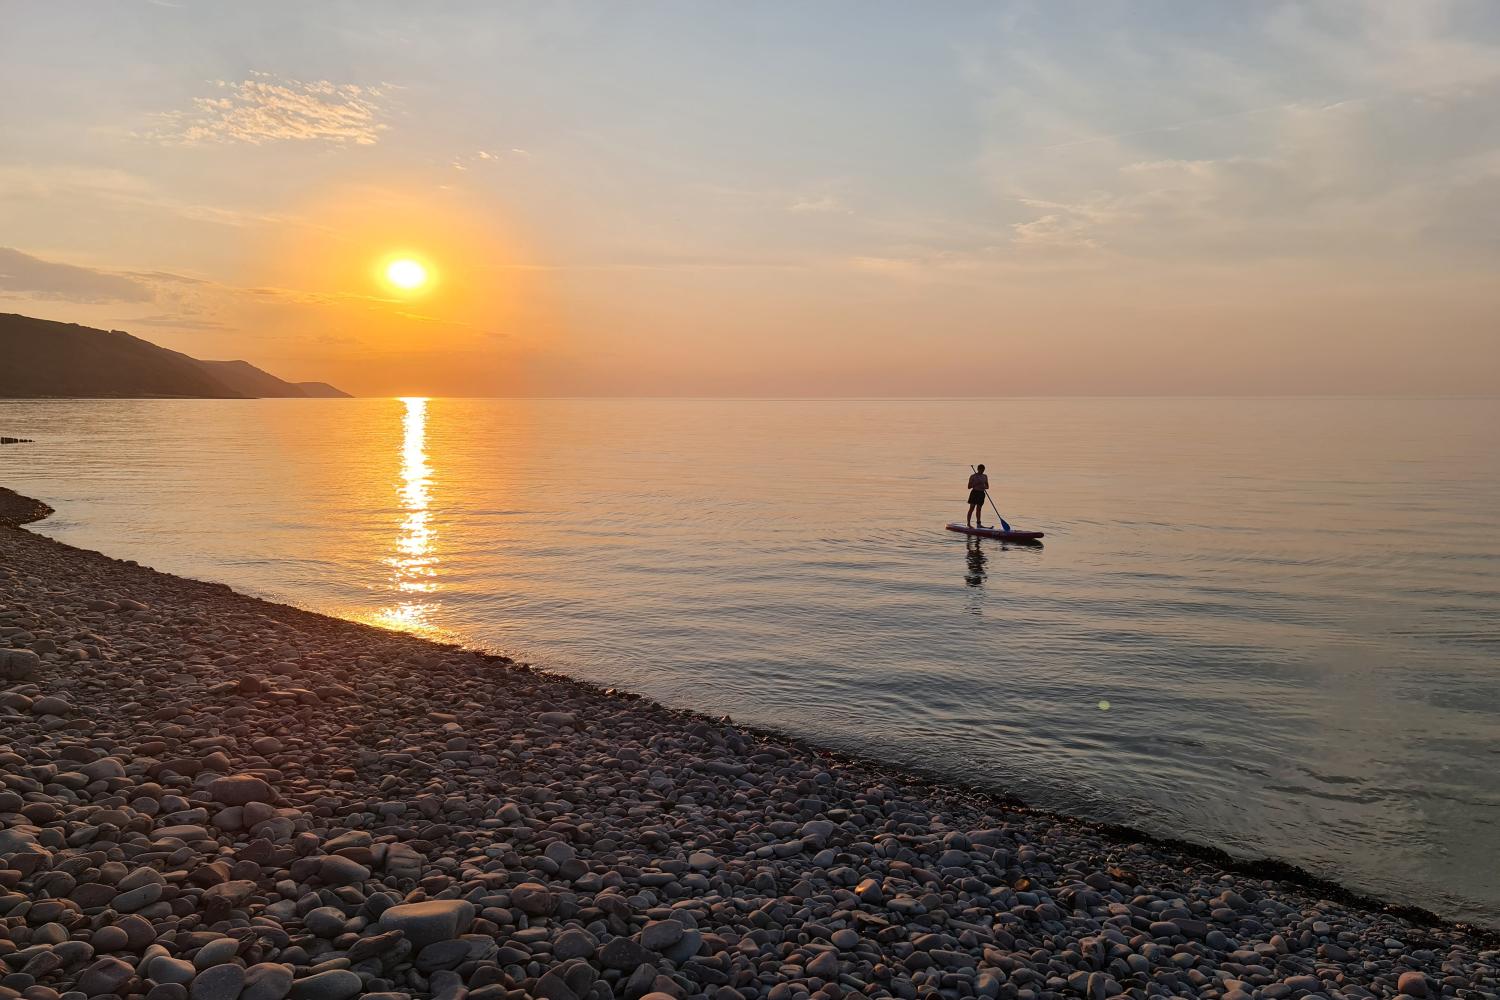 Paddleboarding into the sunset at Porlock Beach - August 2022